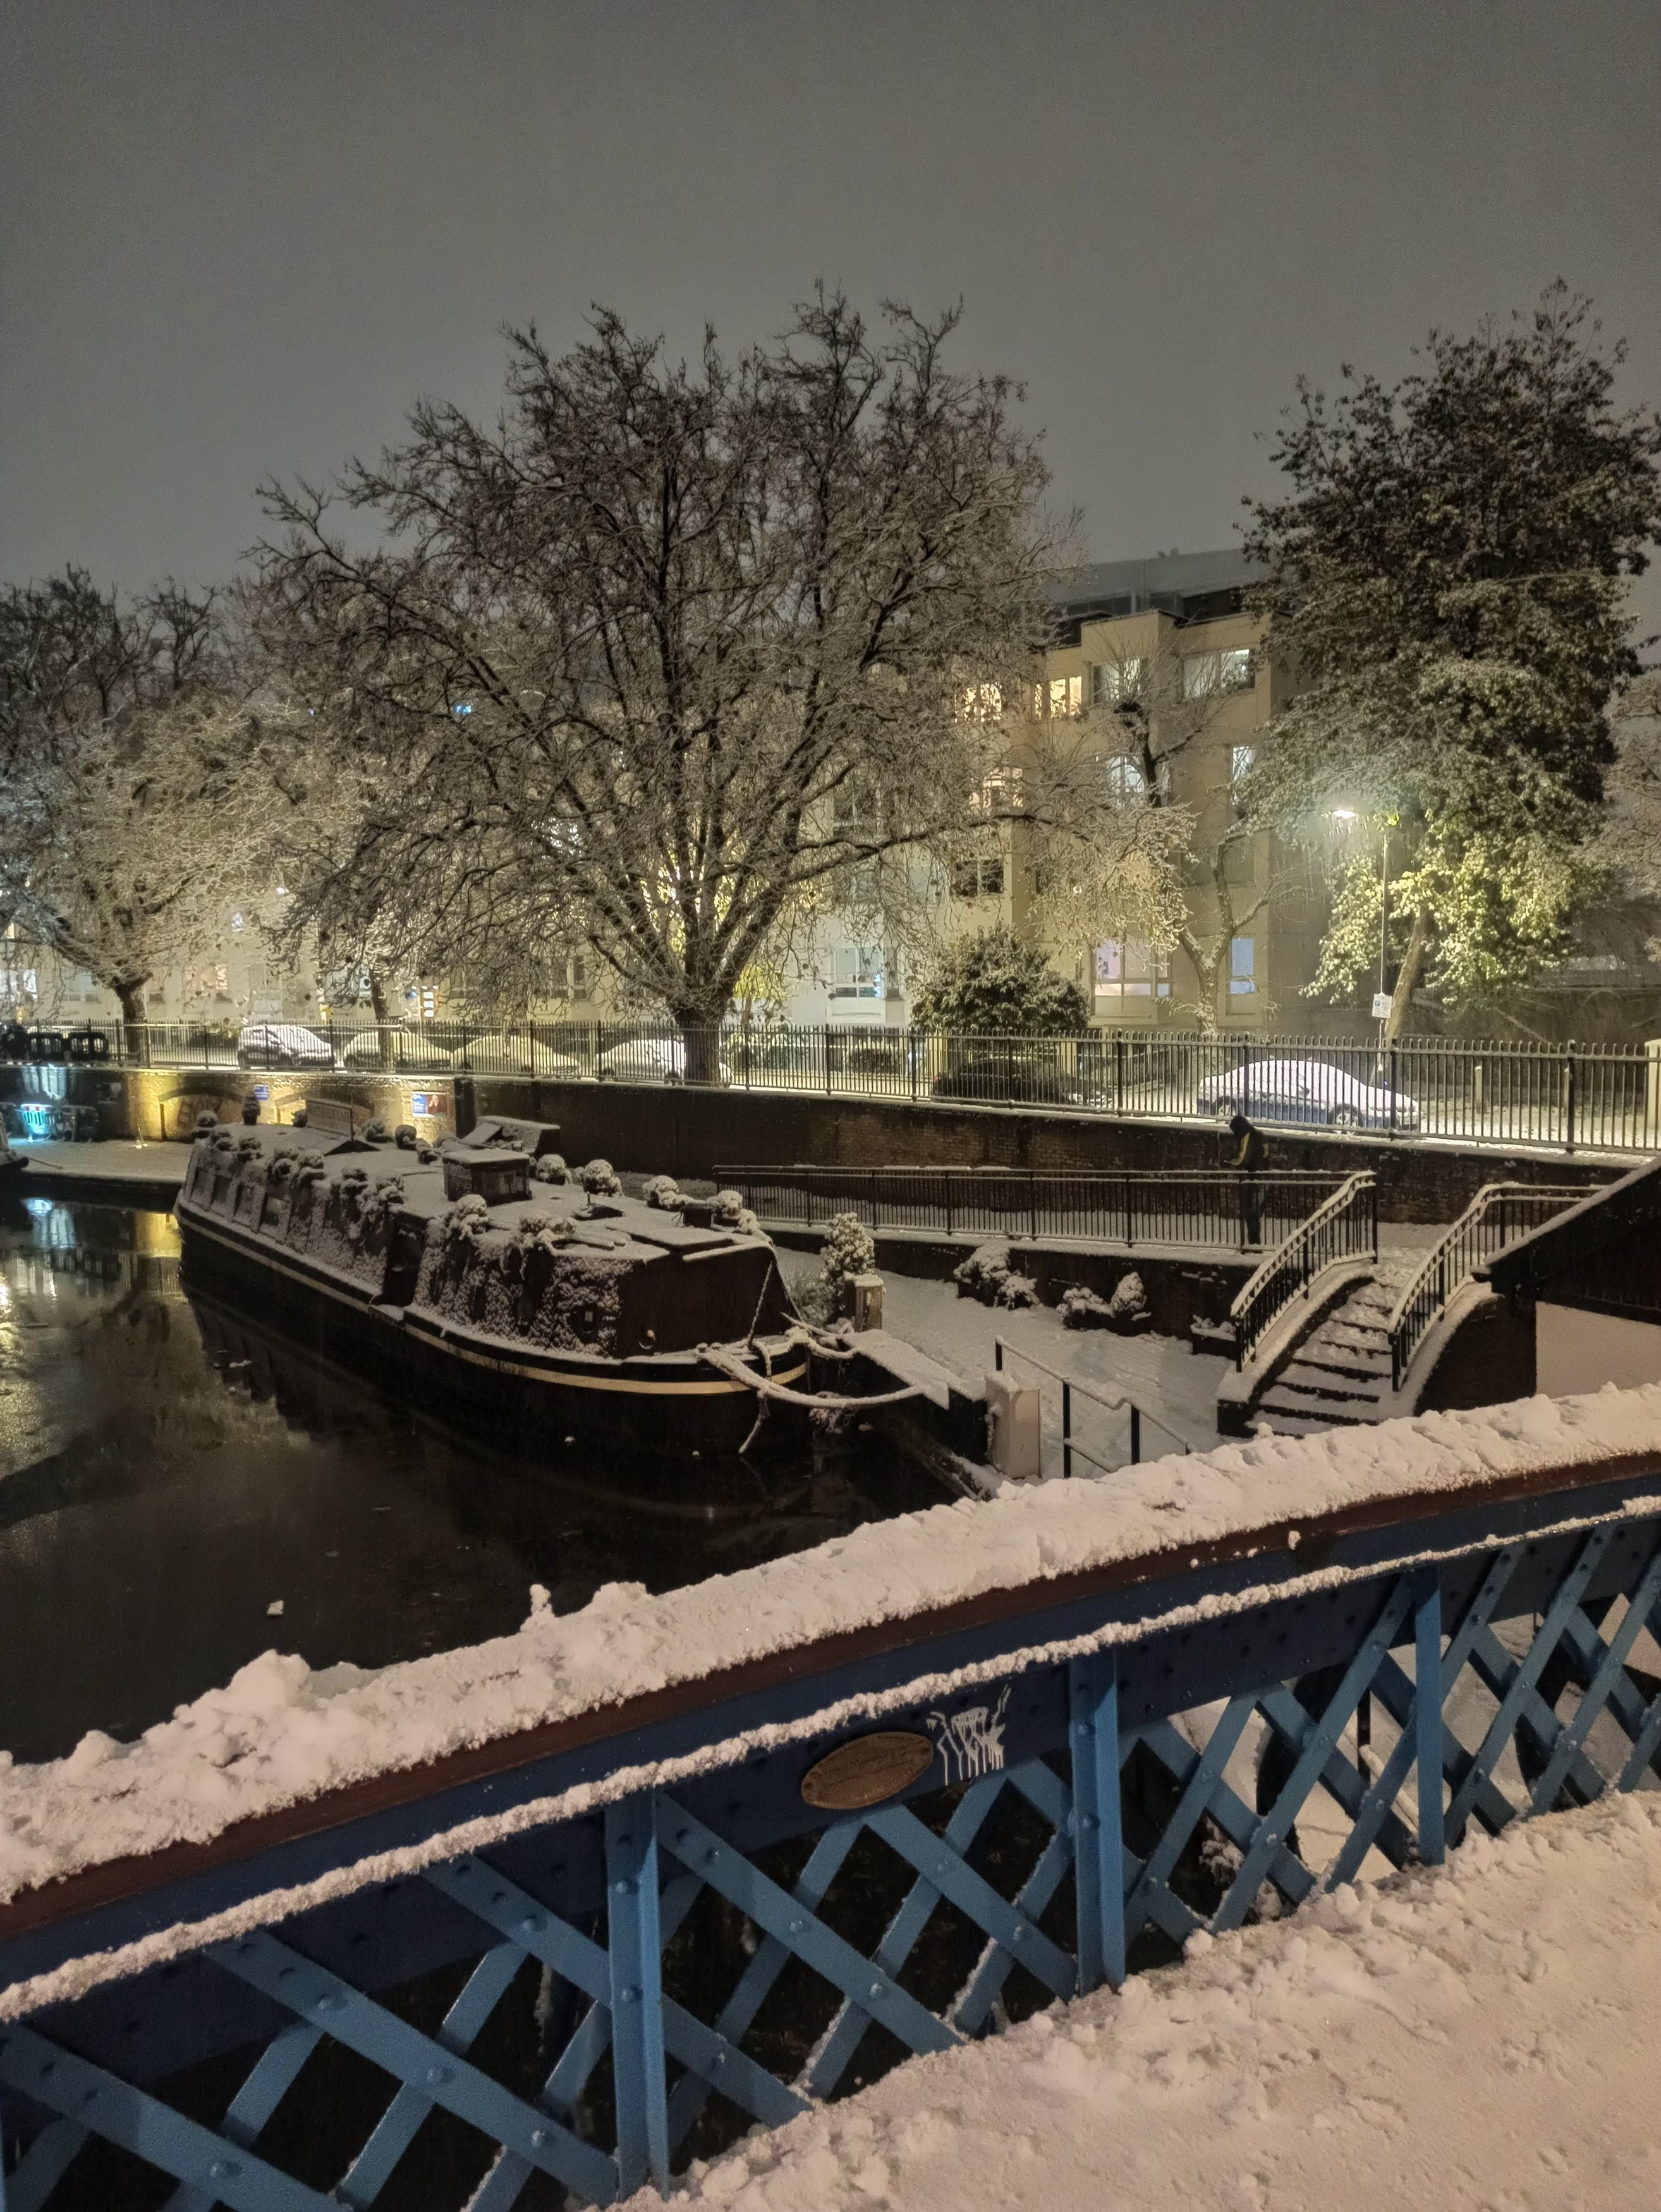 Wintry conditions in Little Venice, London